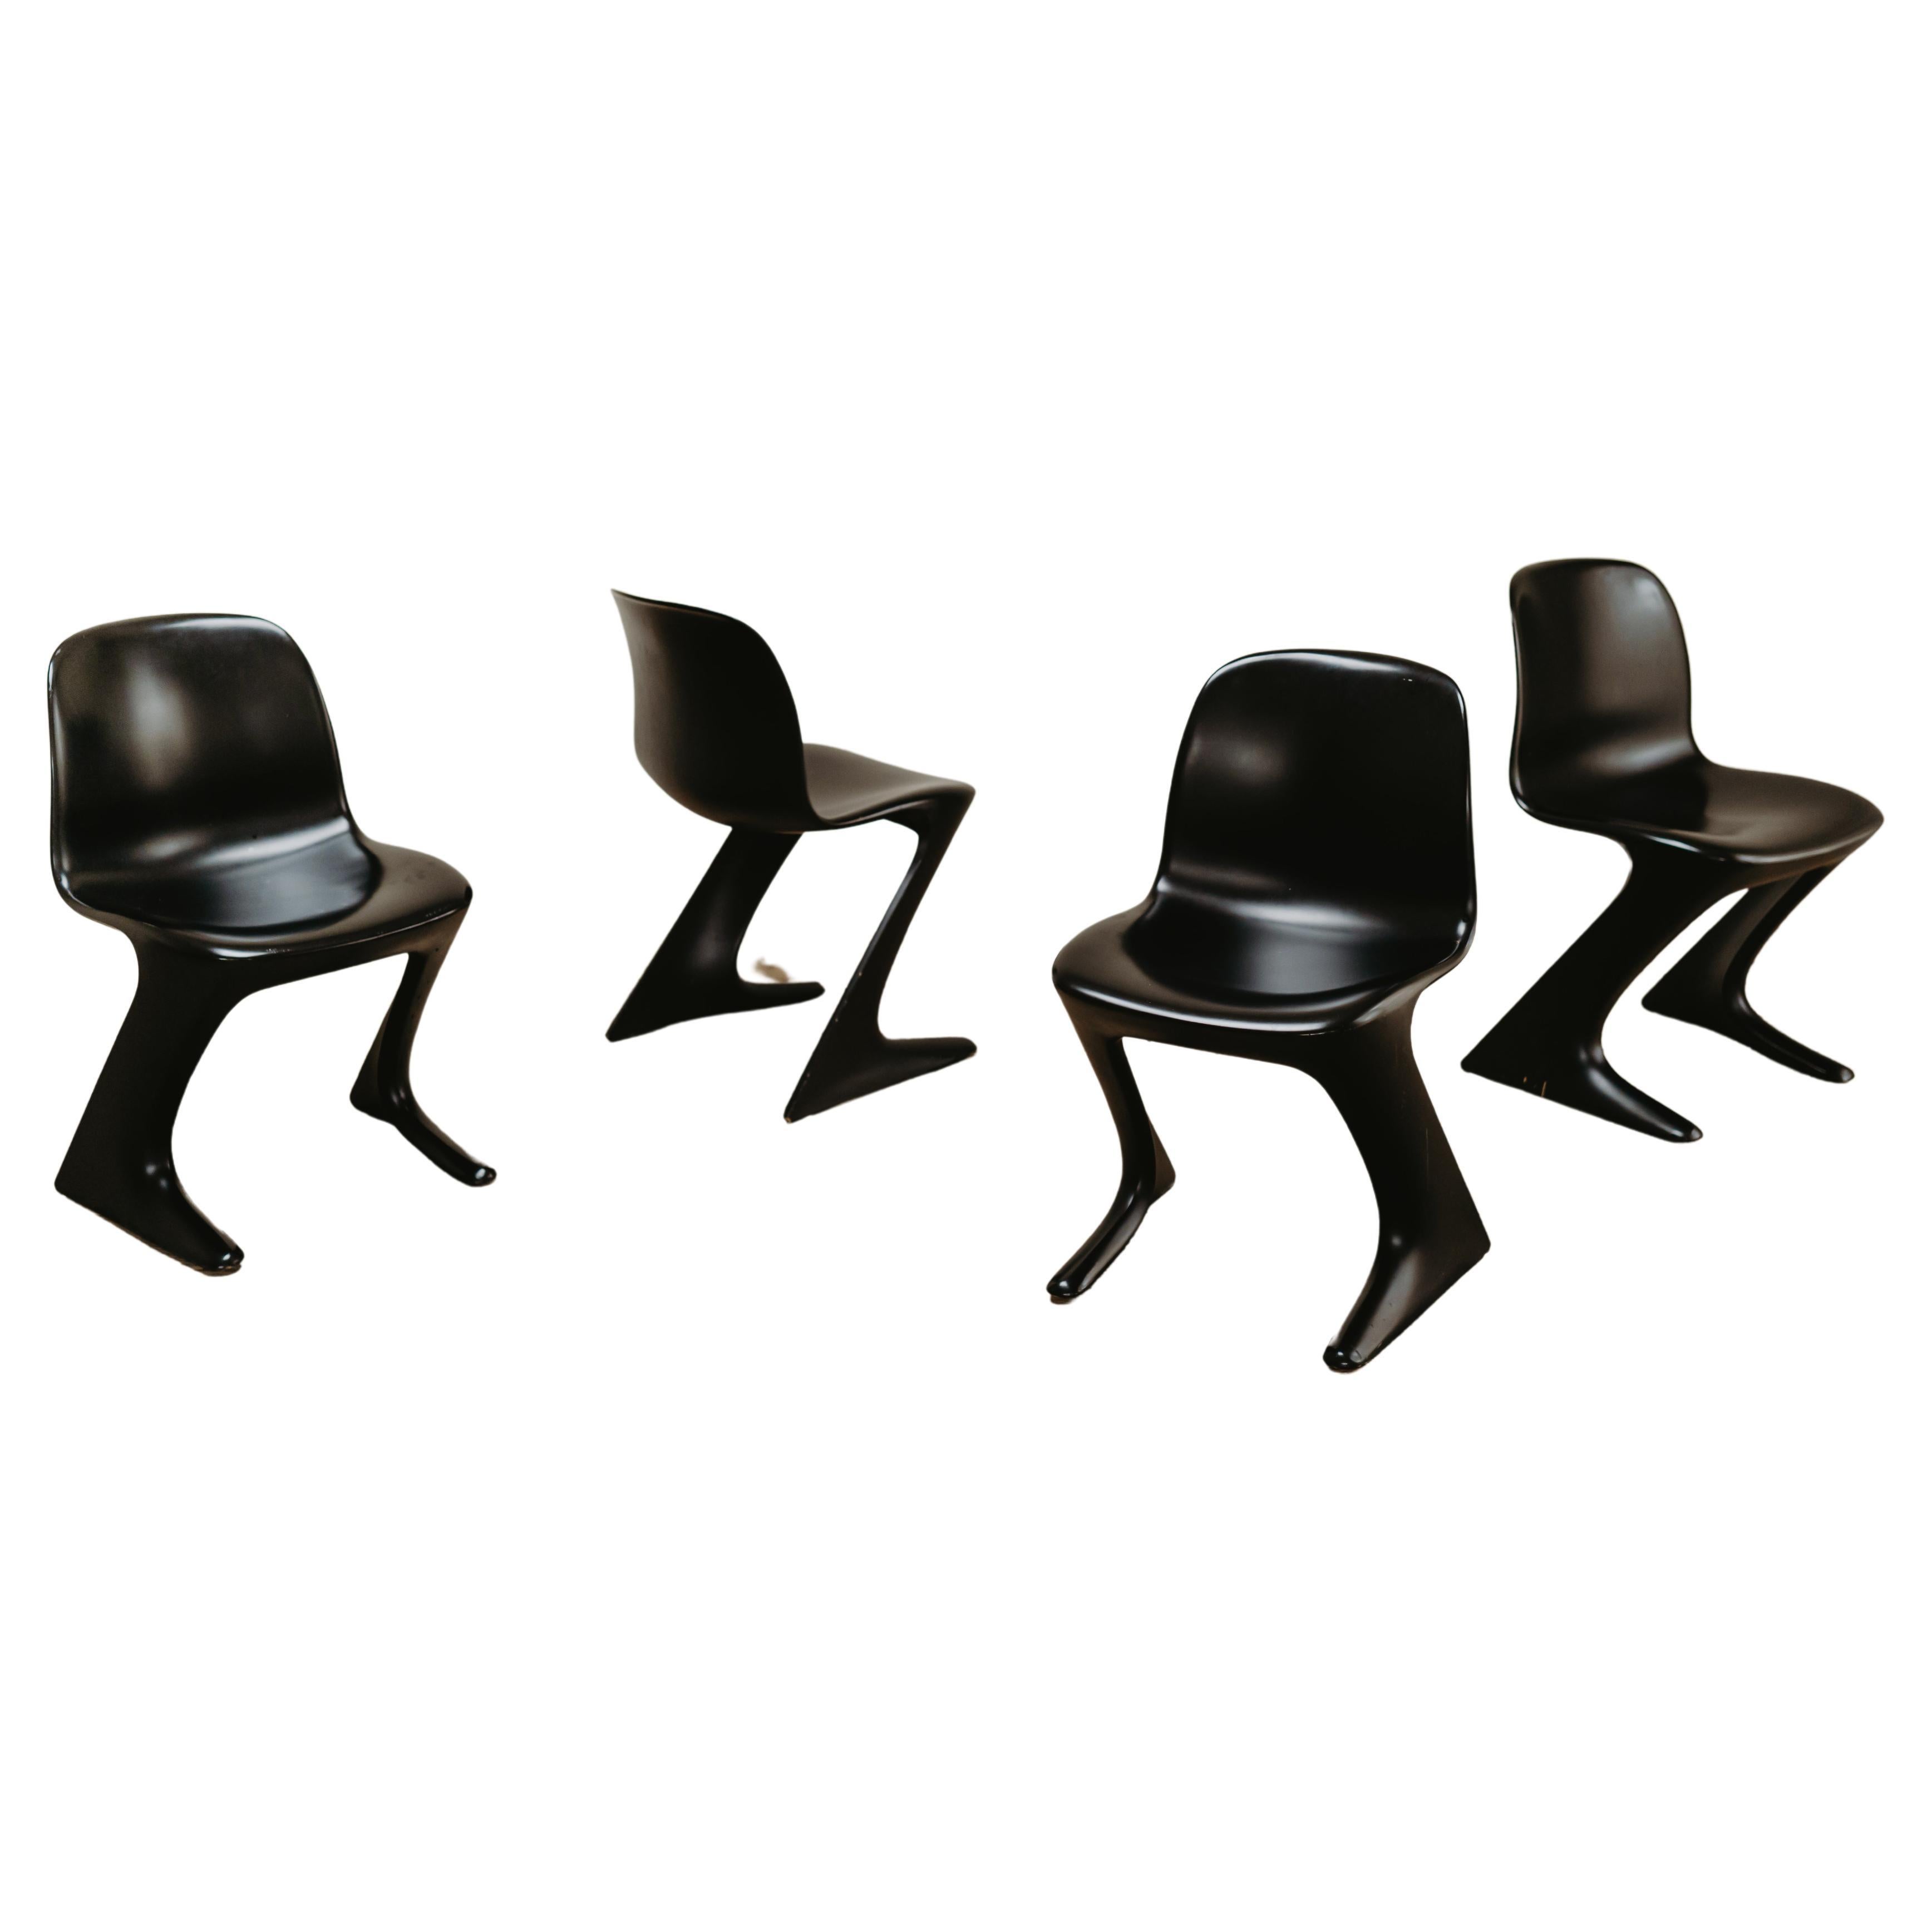 Set of Four Kangaroo Chairs Designed by Ernst Moeckl